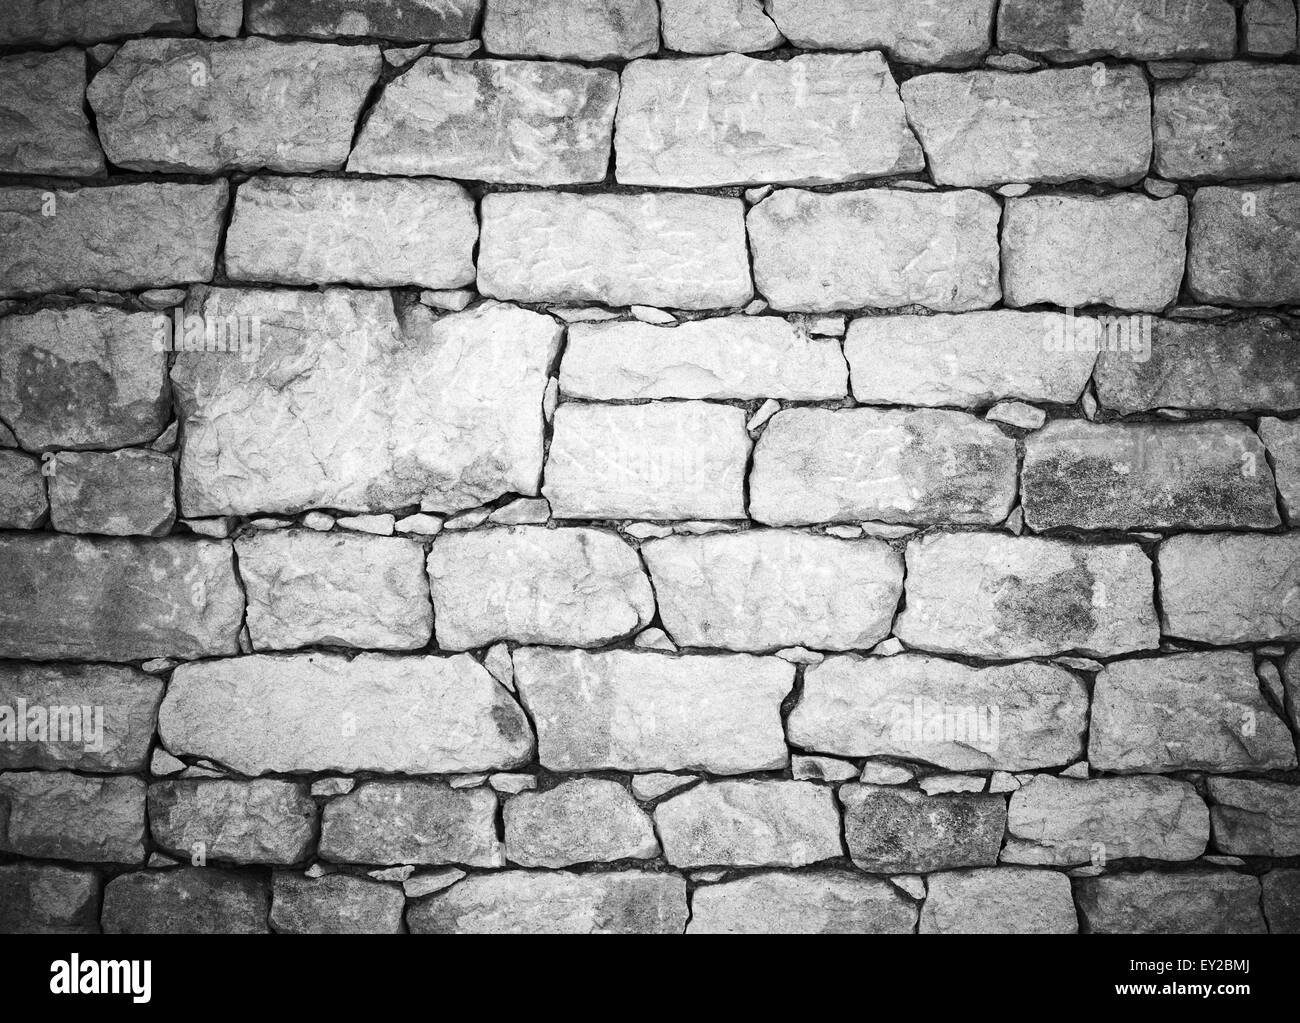 Vignette Filter High Resolution Stock Photography and Images - Alamy